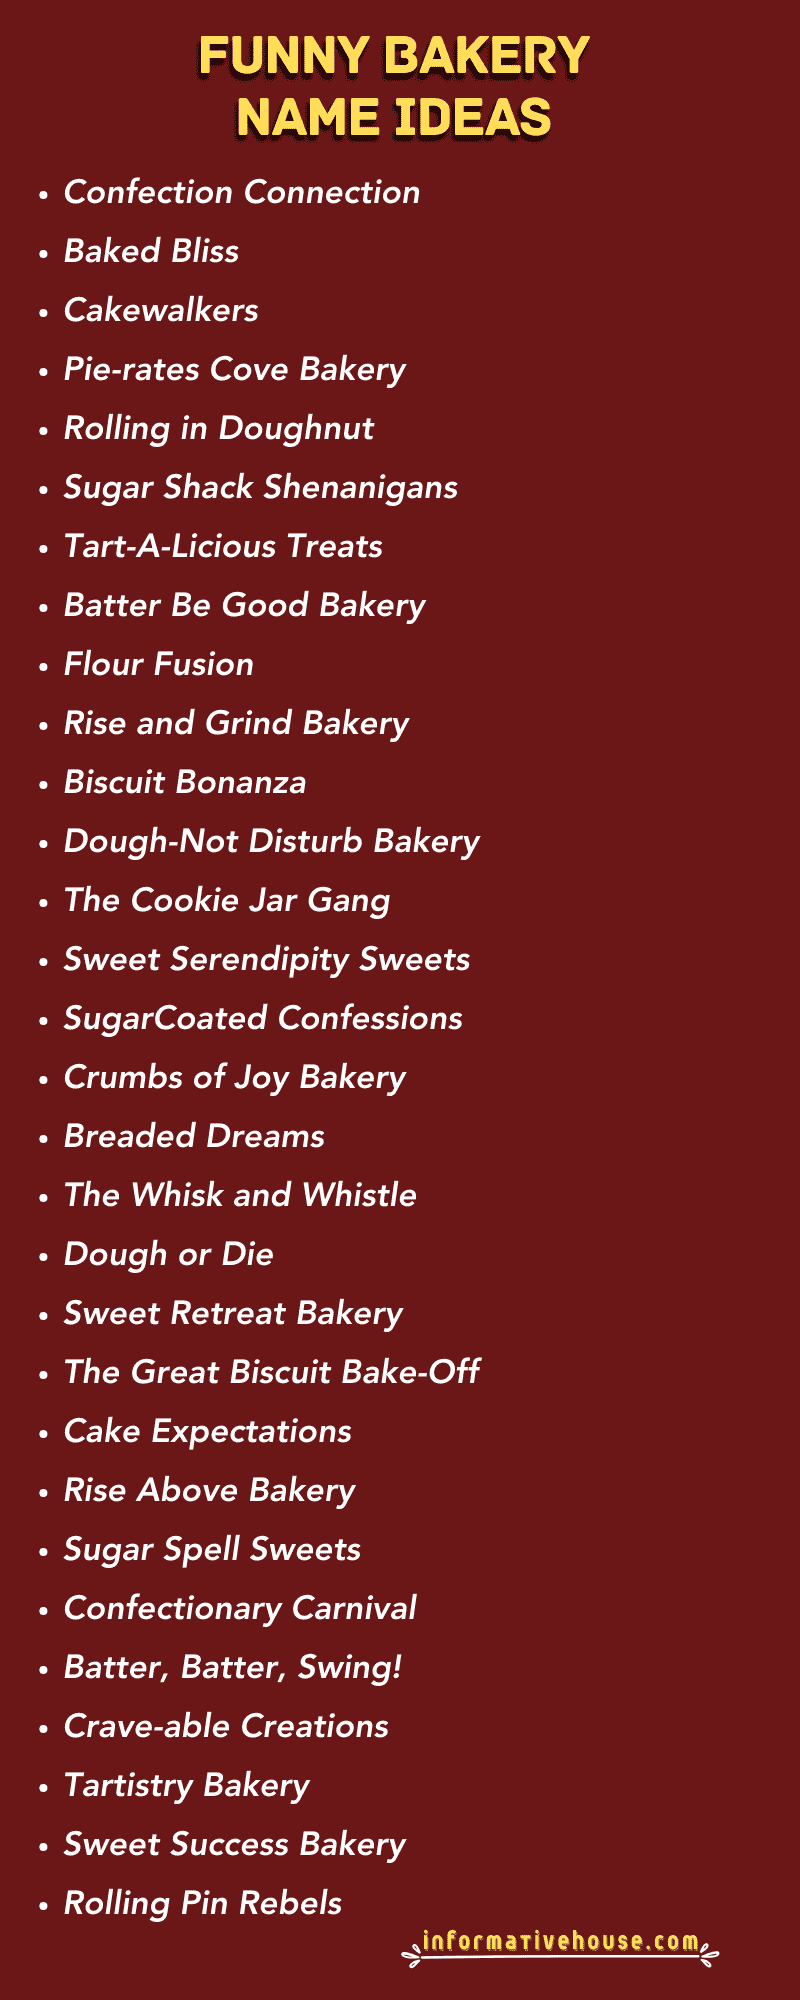 top 30 Funny Bakery Name Ideas for a bakery startup